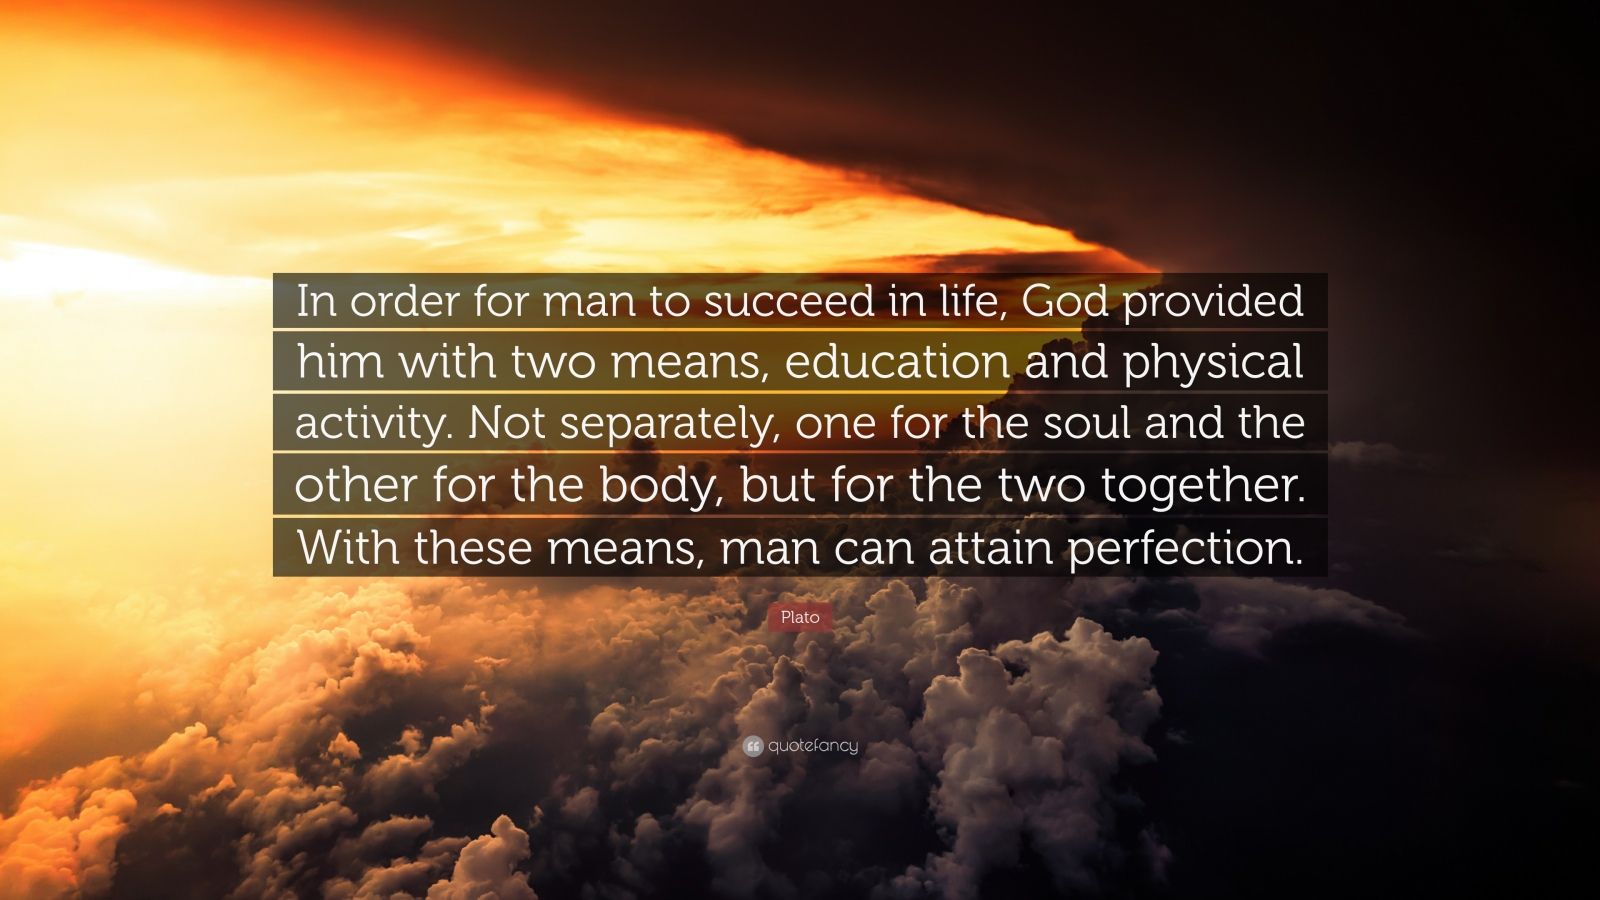 Plato Quote: “In order for man to succeed in life, God provided him